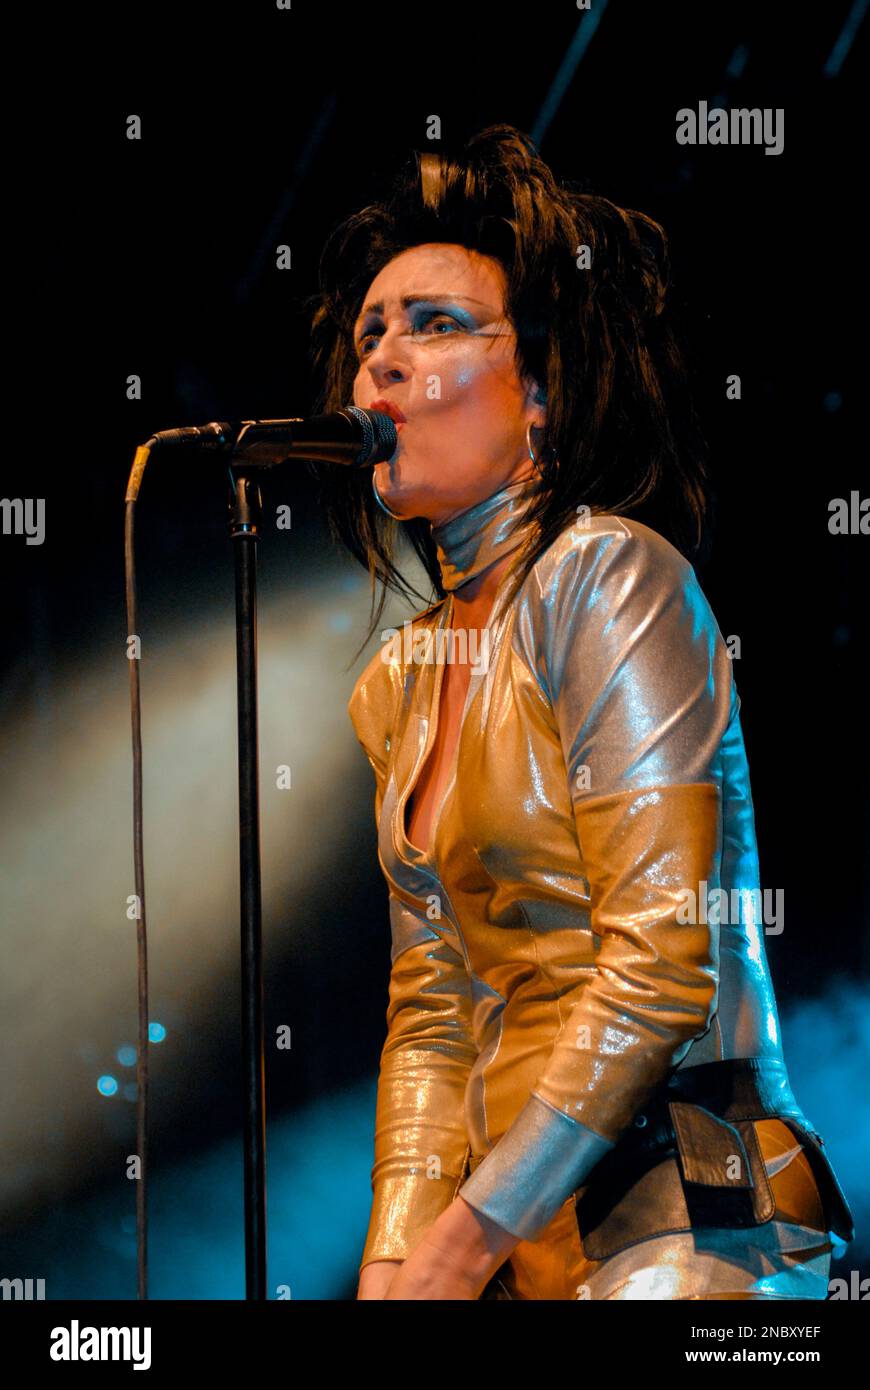 Siouxsie Sioux - Siouxsie and the Banshees, V2008, Hylands Park, Chelmsford, Essex, Regno Unito - 16 agosto 2008 Foto Stock